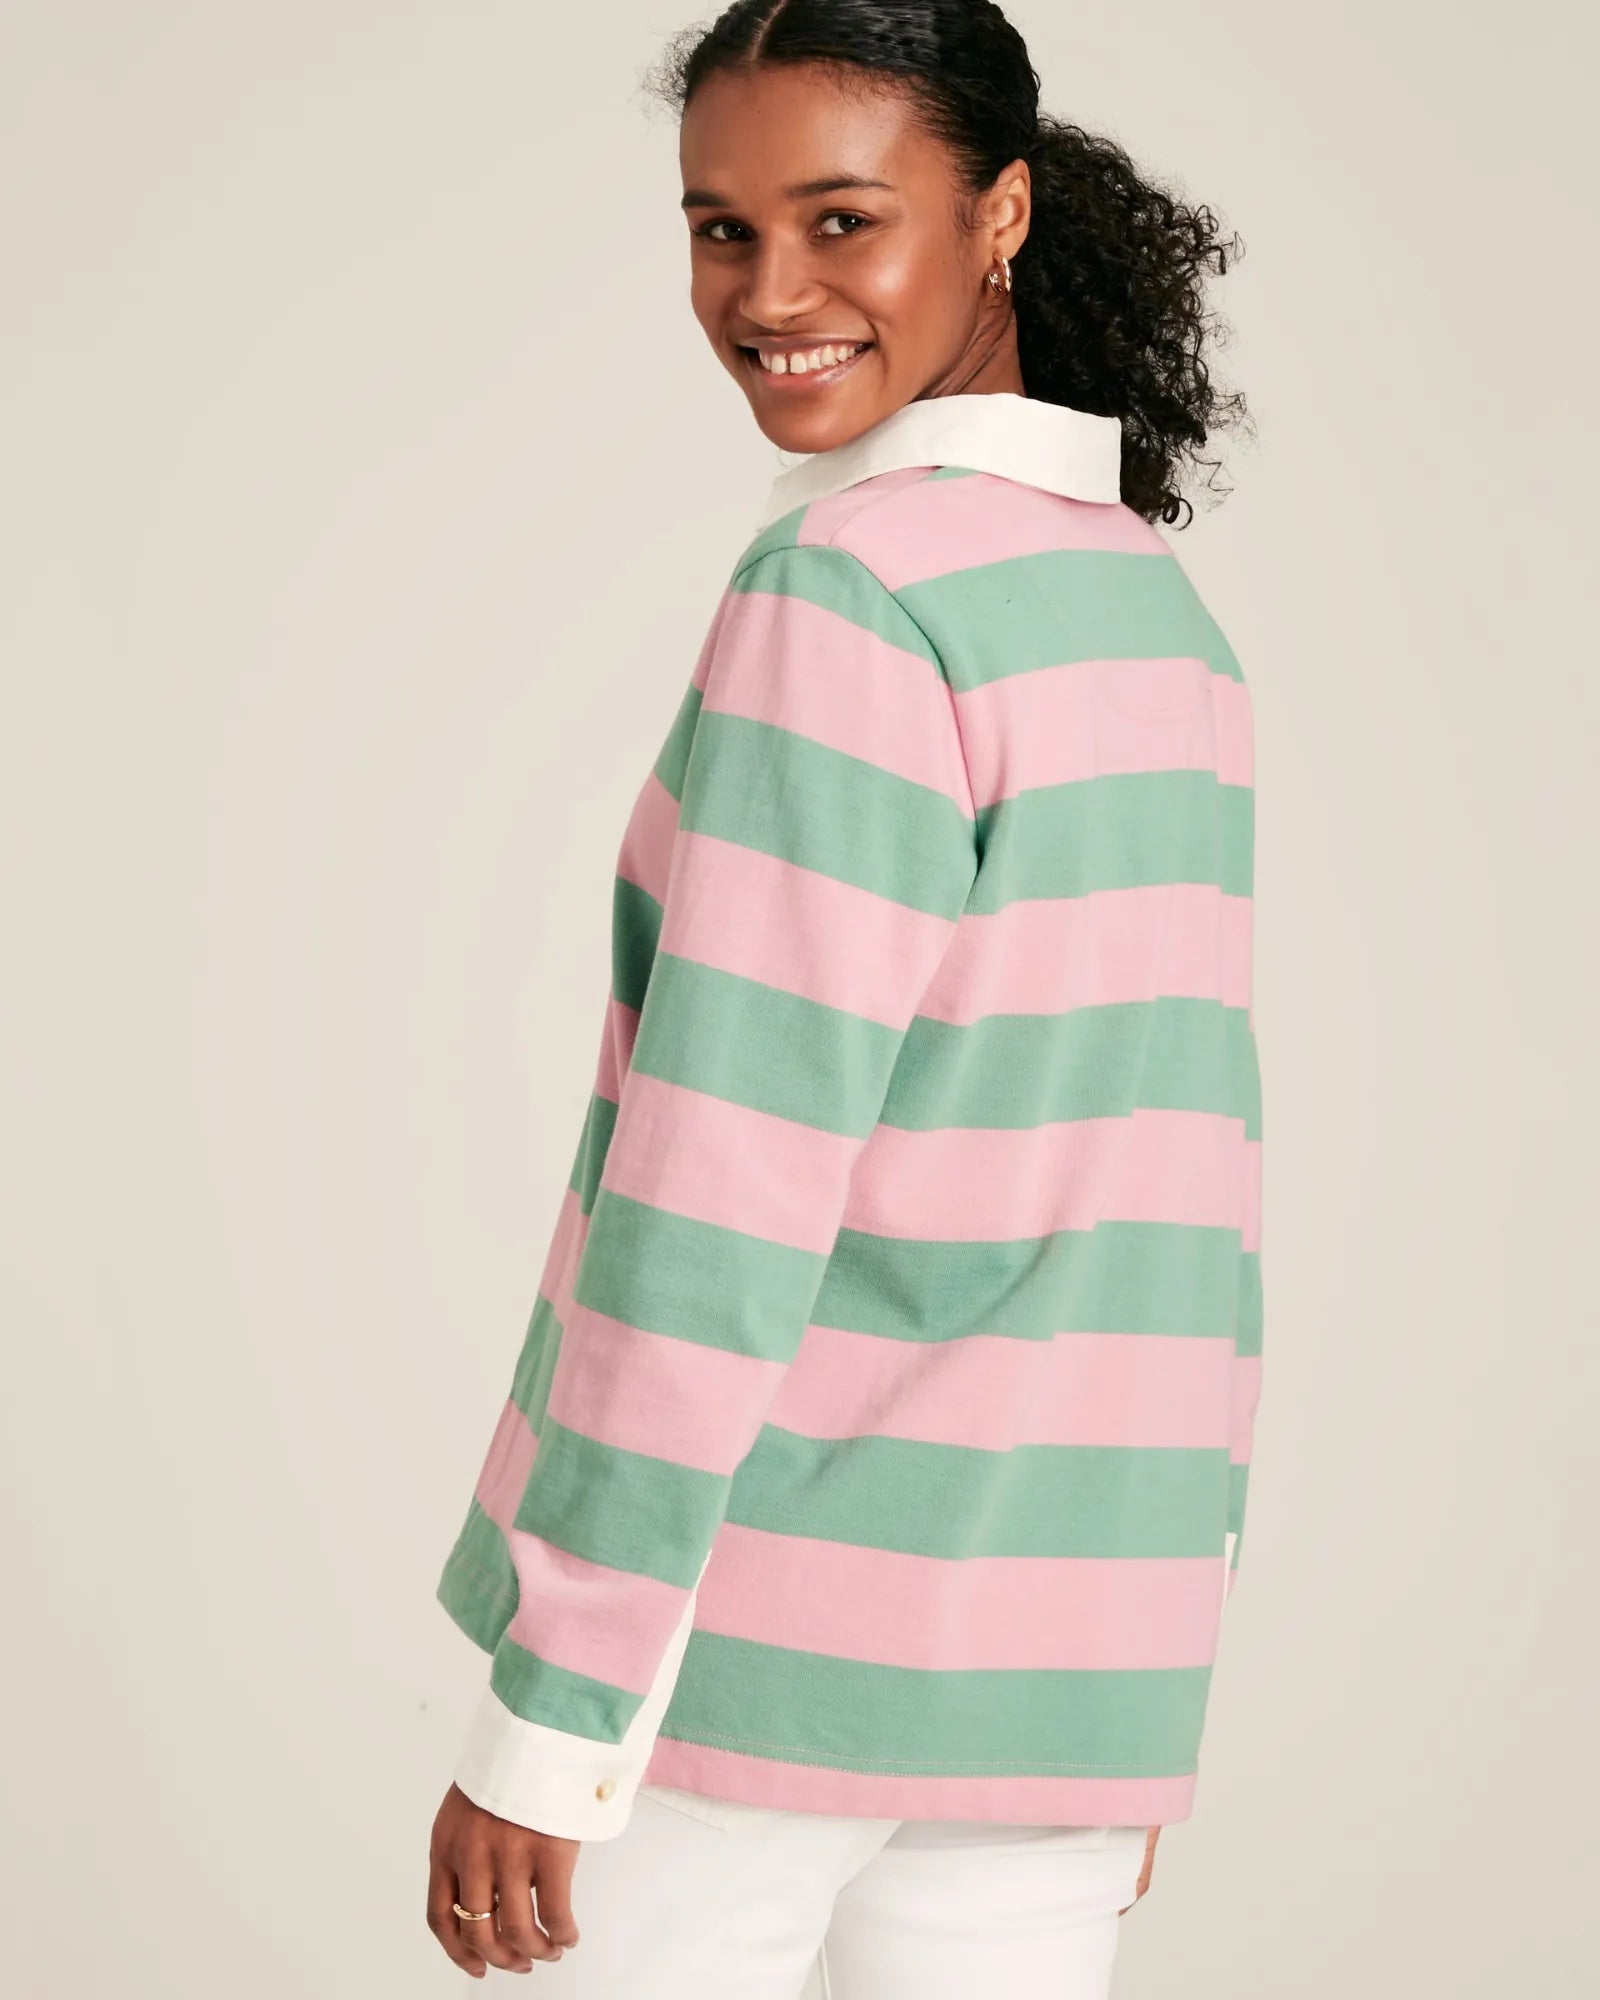 Falmouth Pink & Green Striped Cotton Rugby Shirt